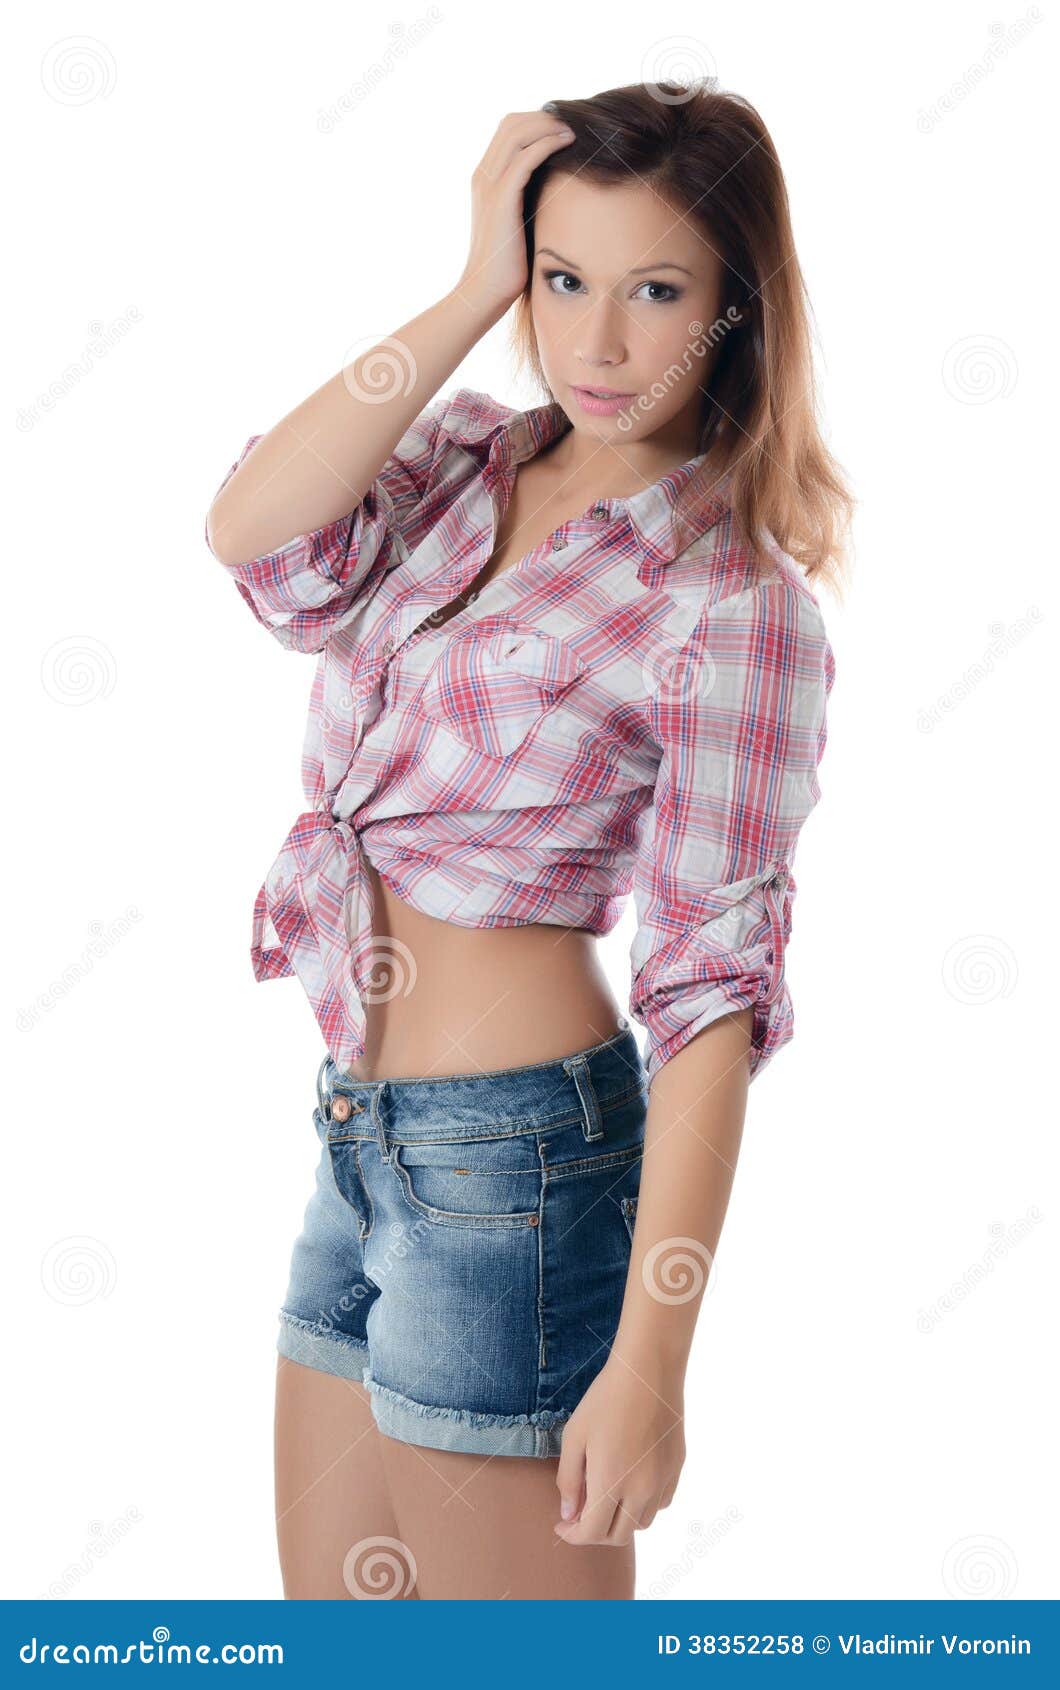 The Beautiful Girl in Jeans Shorts Stock Photo - Image of attractive ...